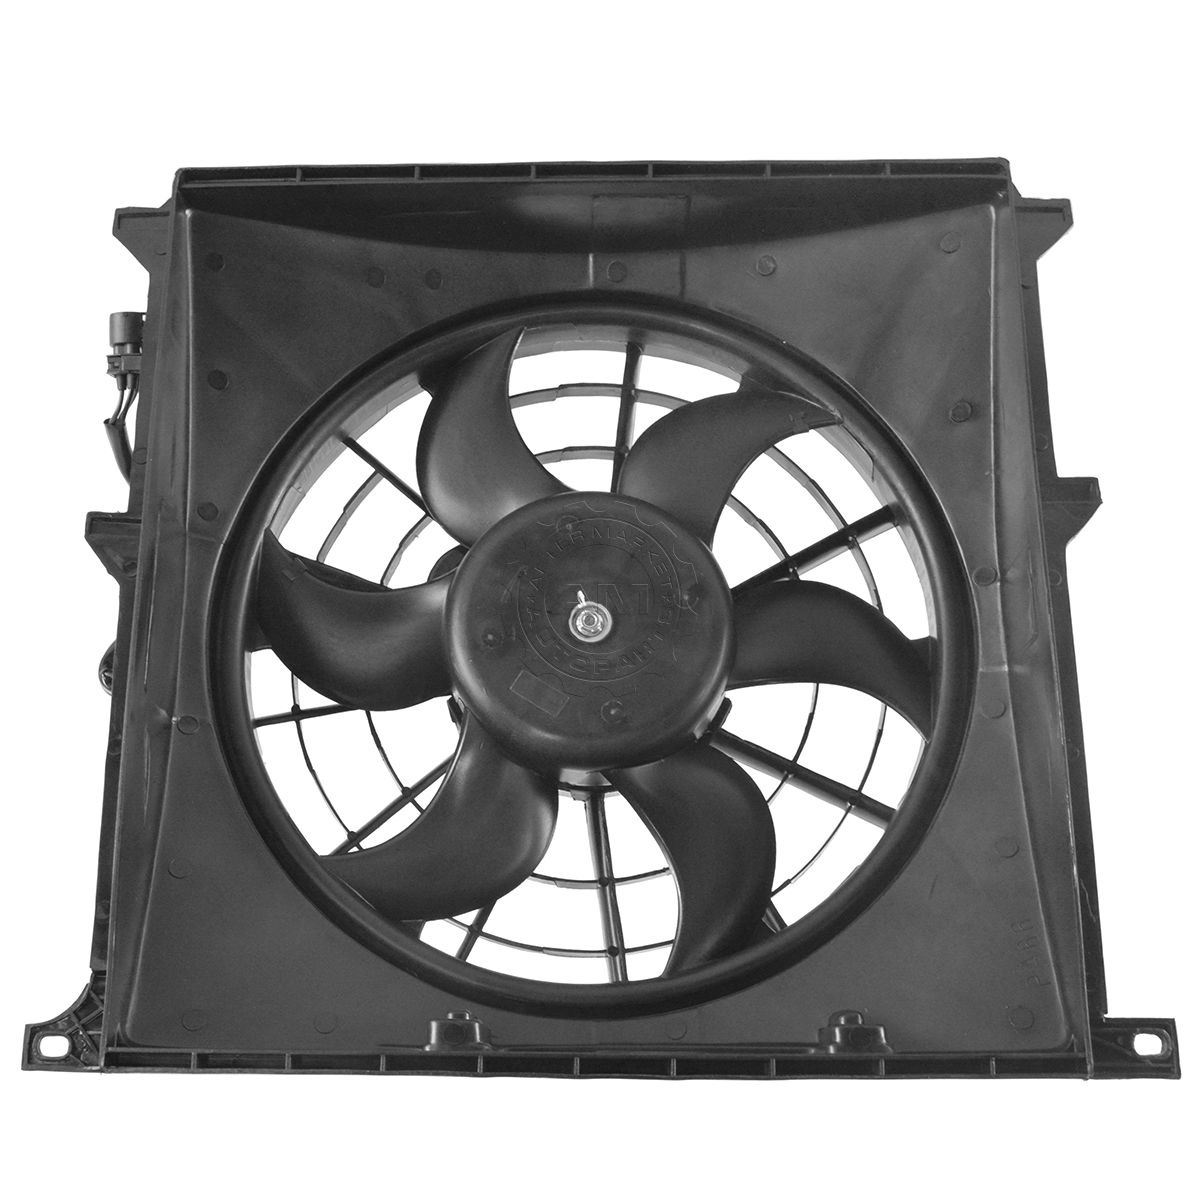 AC A/C Condenser Cooling Suction Fan w/ Shroud 8 Blade for BMW E36 3 Series 